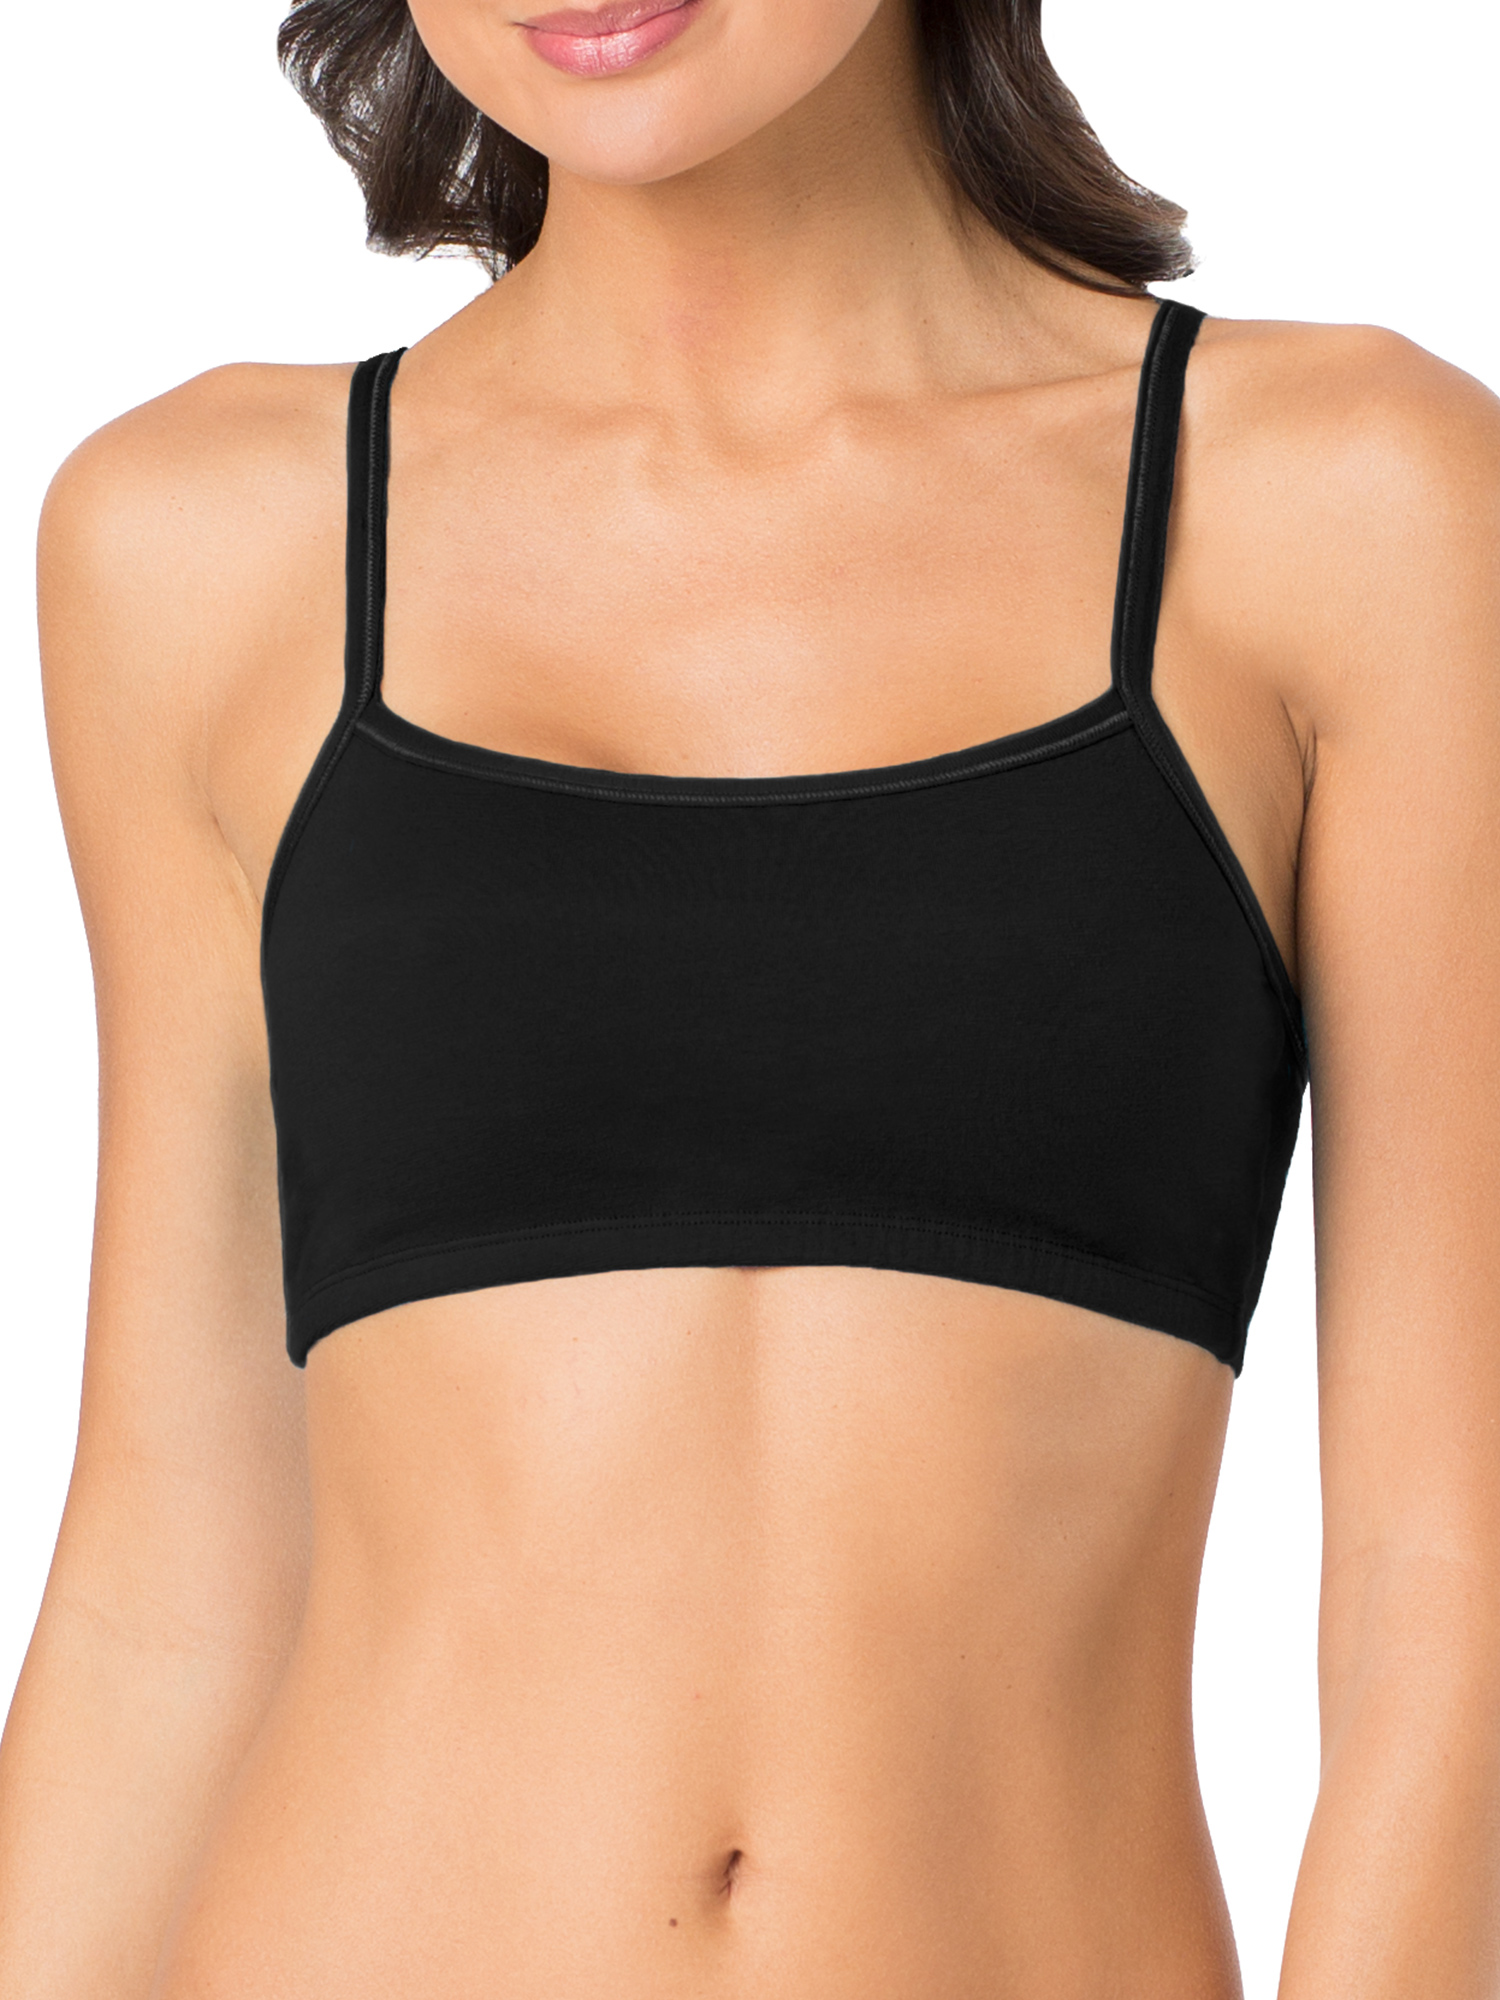 Fruit of the Loom Women's Spaghetti Strap Cotton Sports Bra, 3-Pack, Style-9036 - image 2 of 9